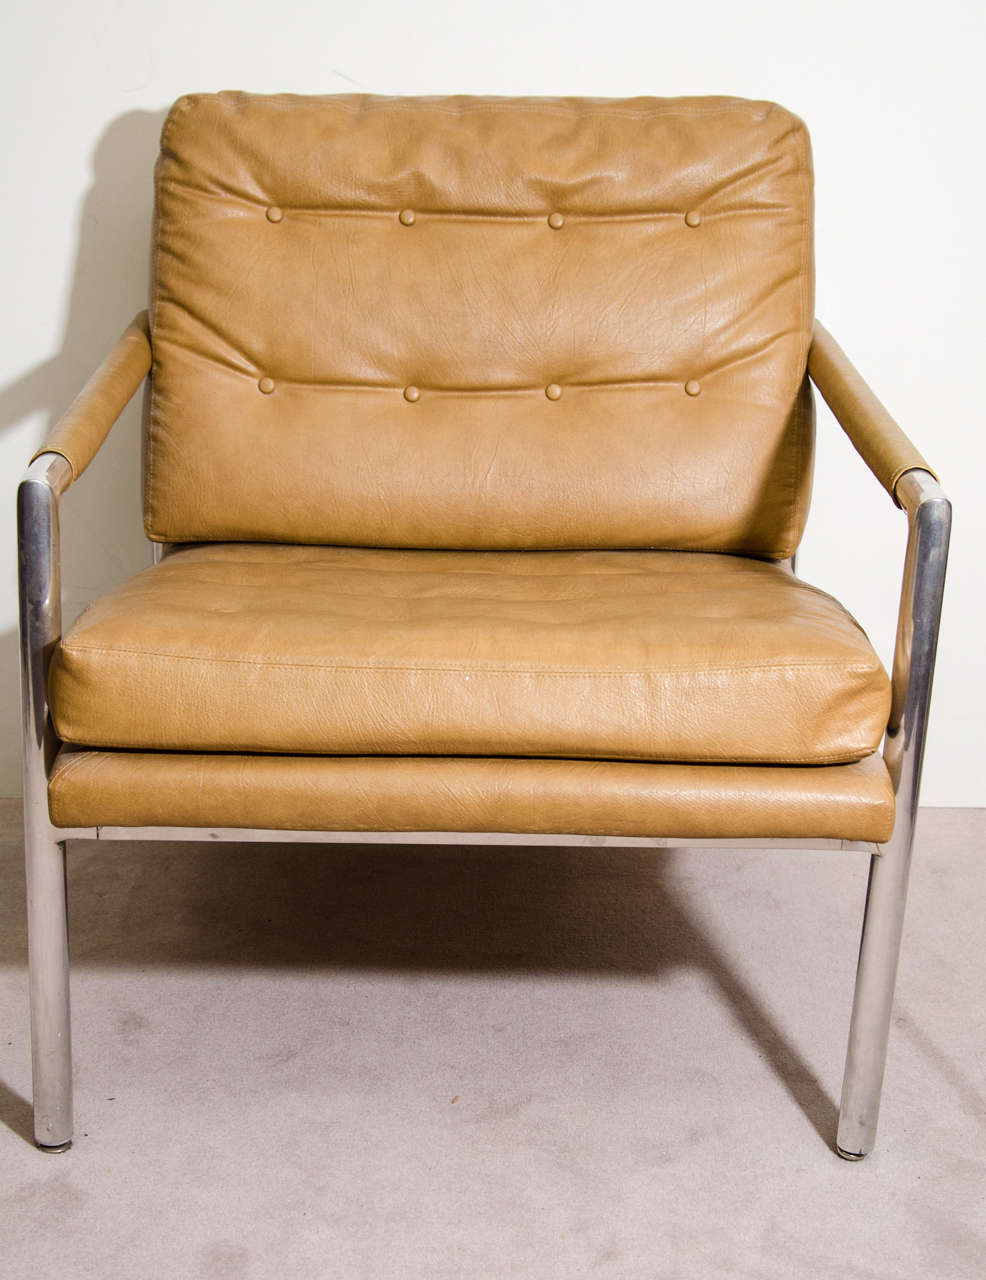 A pair of vintage Harvey Probber club chairs with aluminum frames and original tan vinyl button-tufted upholstery.